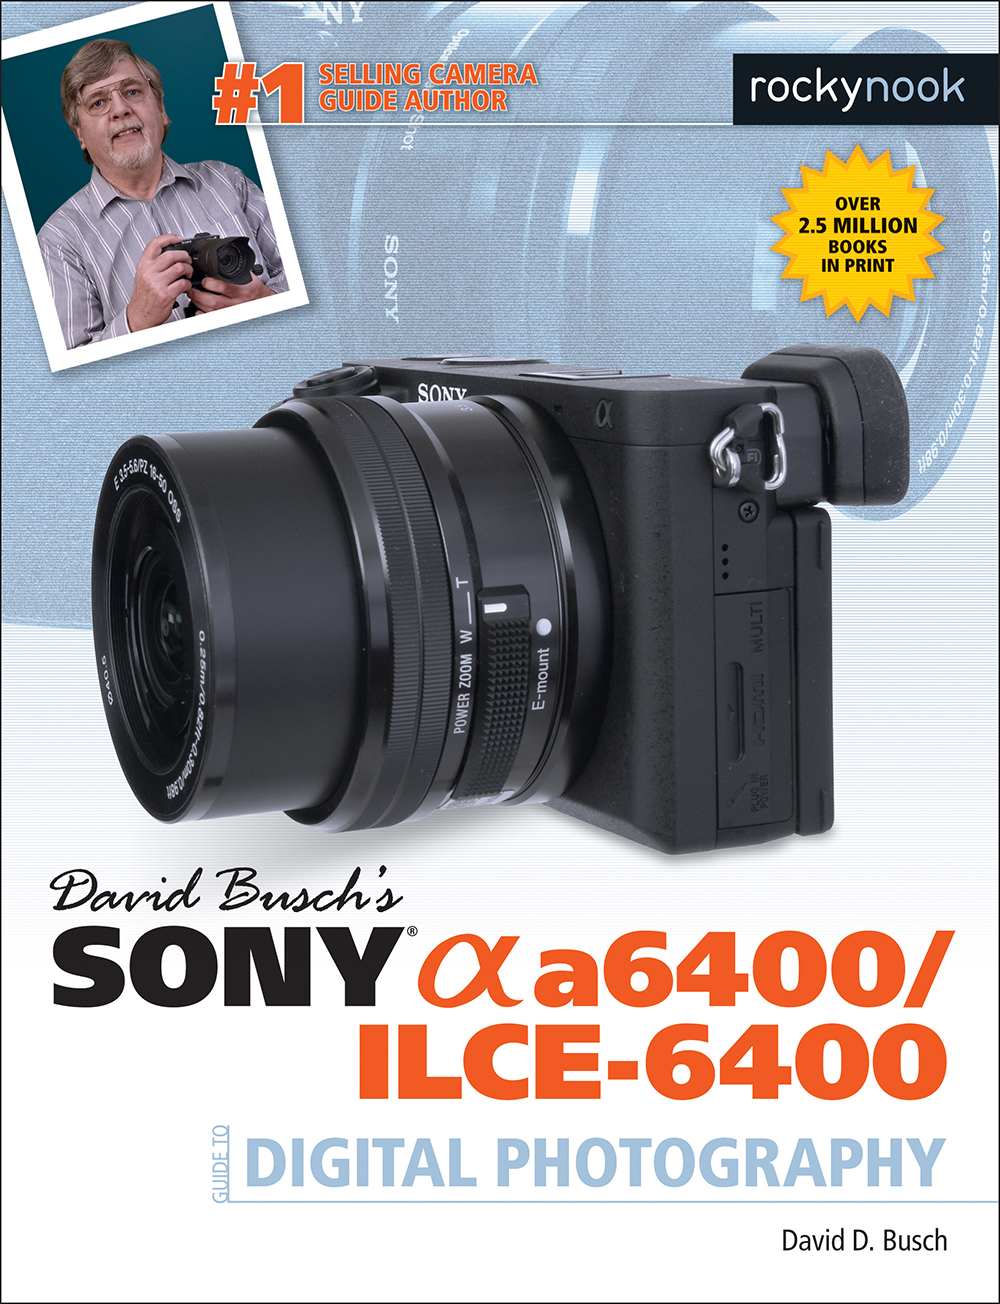 David Buschs Sony Alpha a6400/ILCE-6400 Guide to Digital Photography -  RockyNook